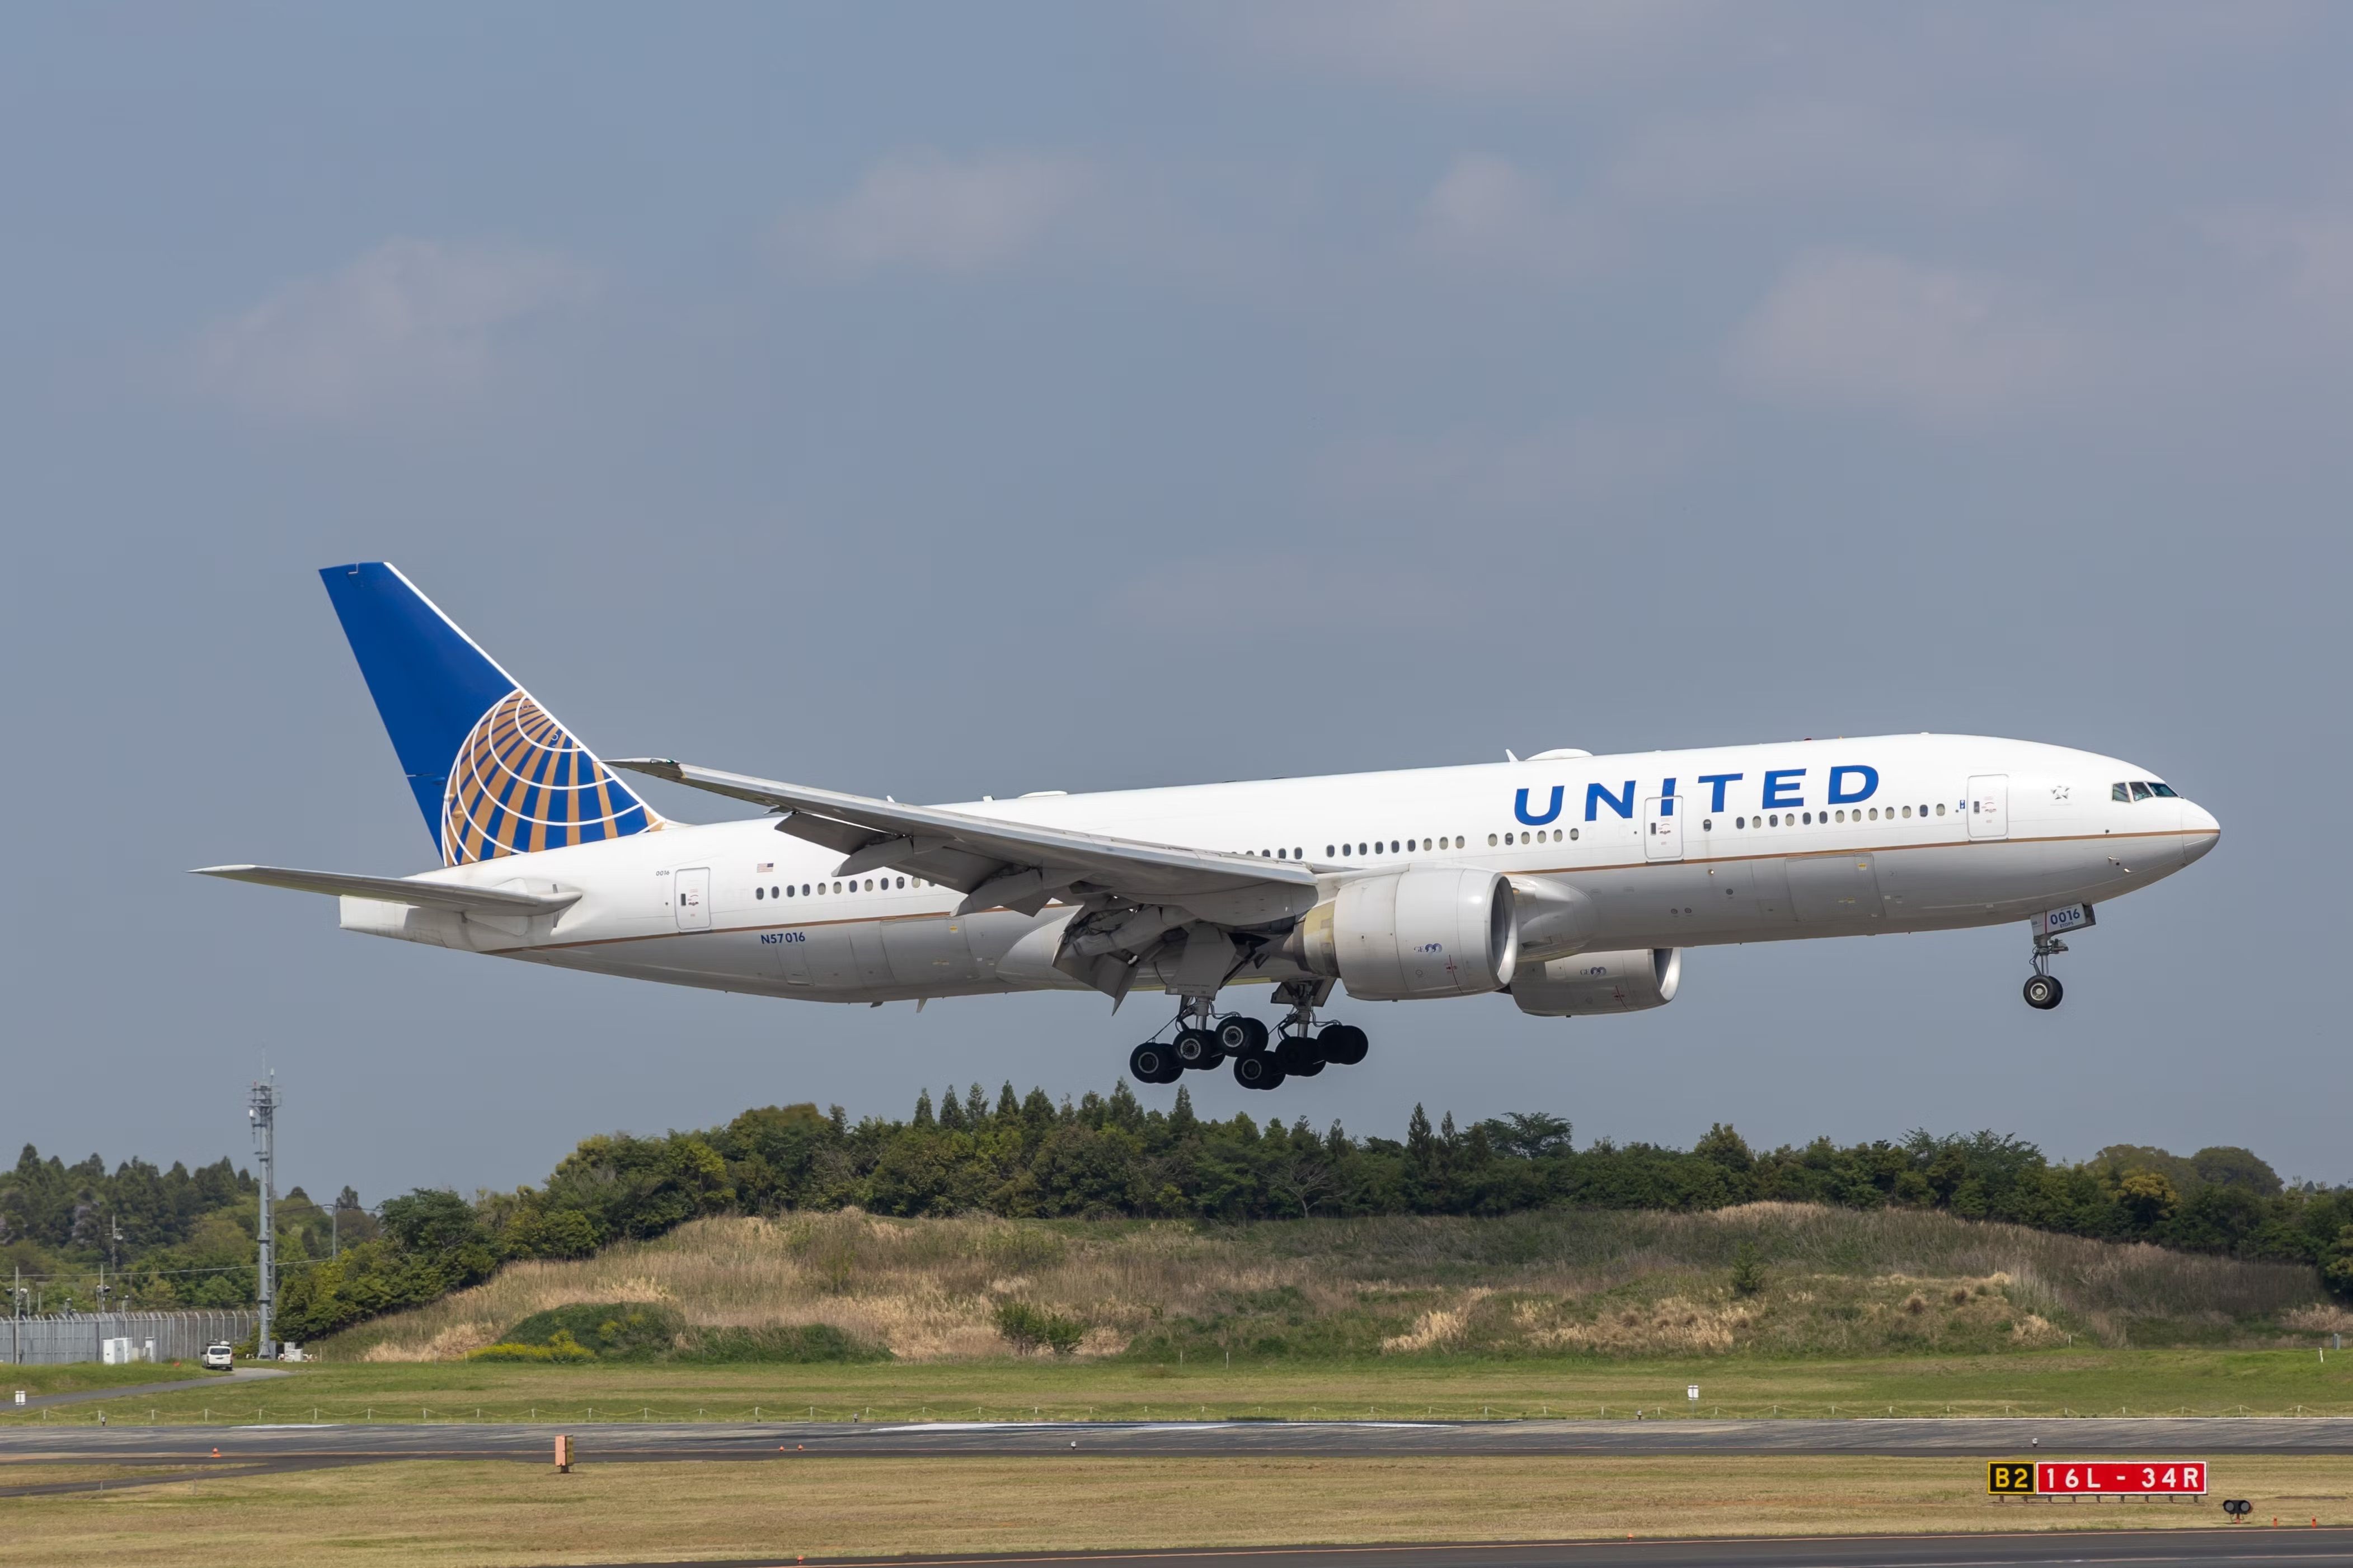 A United Airlines Boeing 777 about to land.